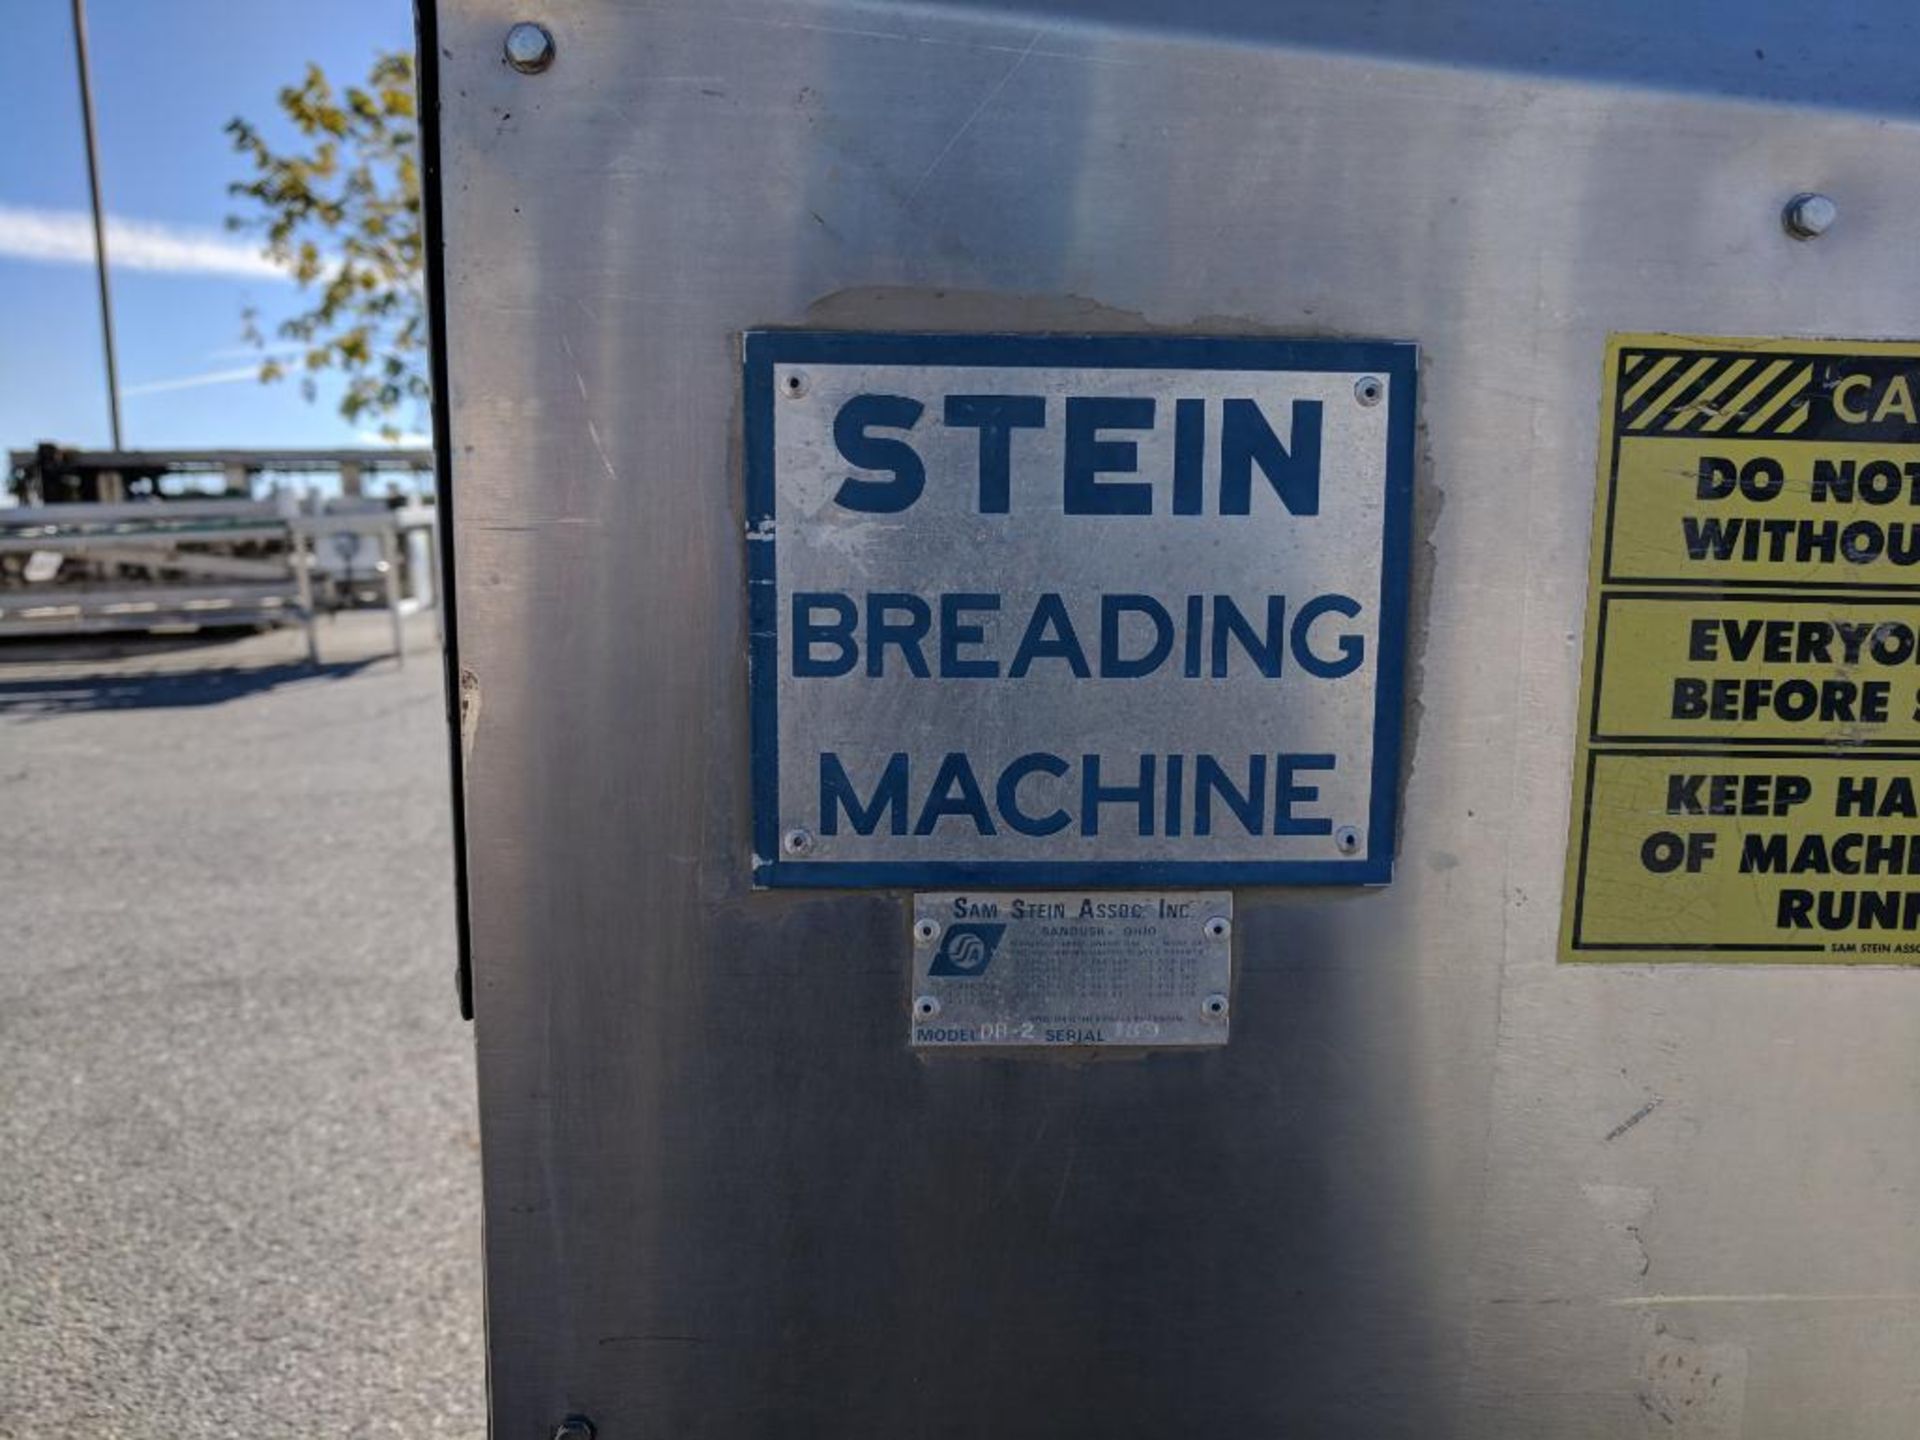 Stein breading machine stainless steel - Image 4 of 16